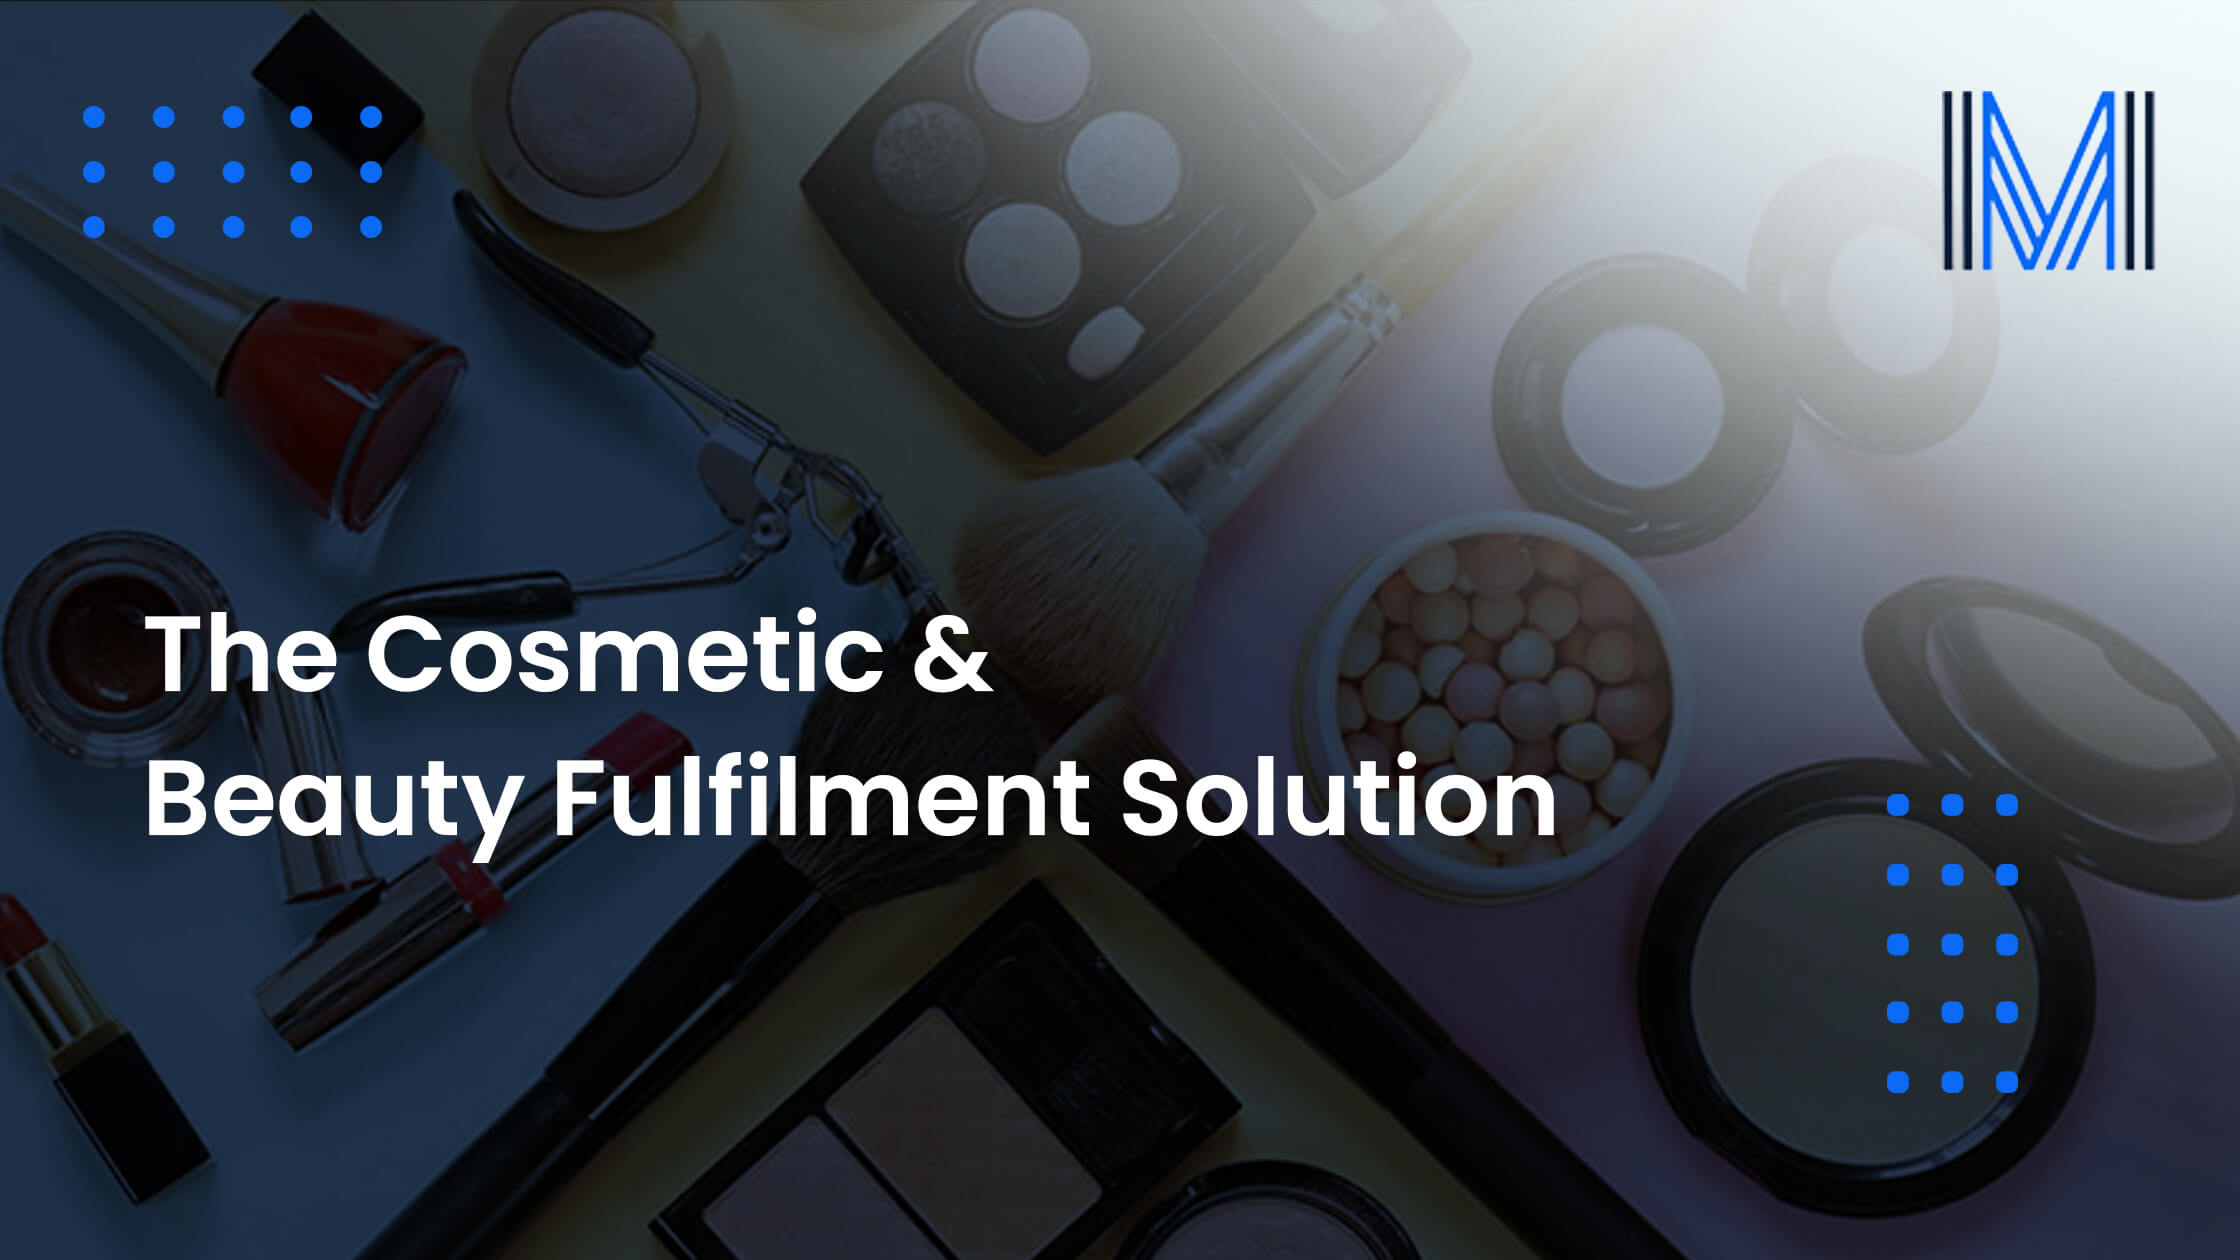 The Cosmetic & Beauty Fulfilment Solution